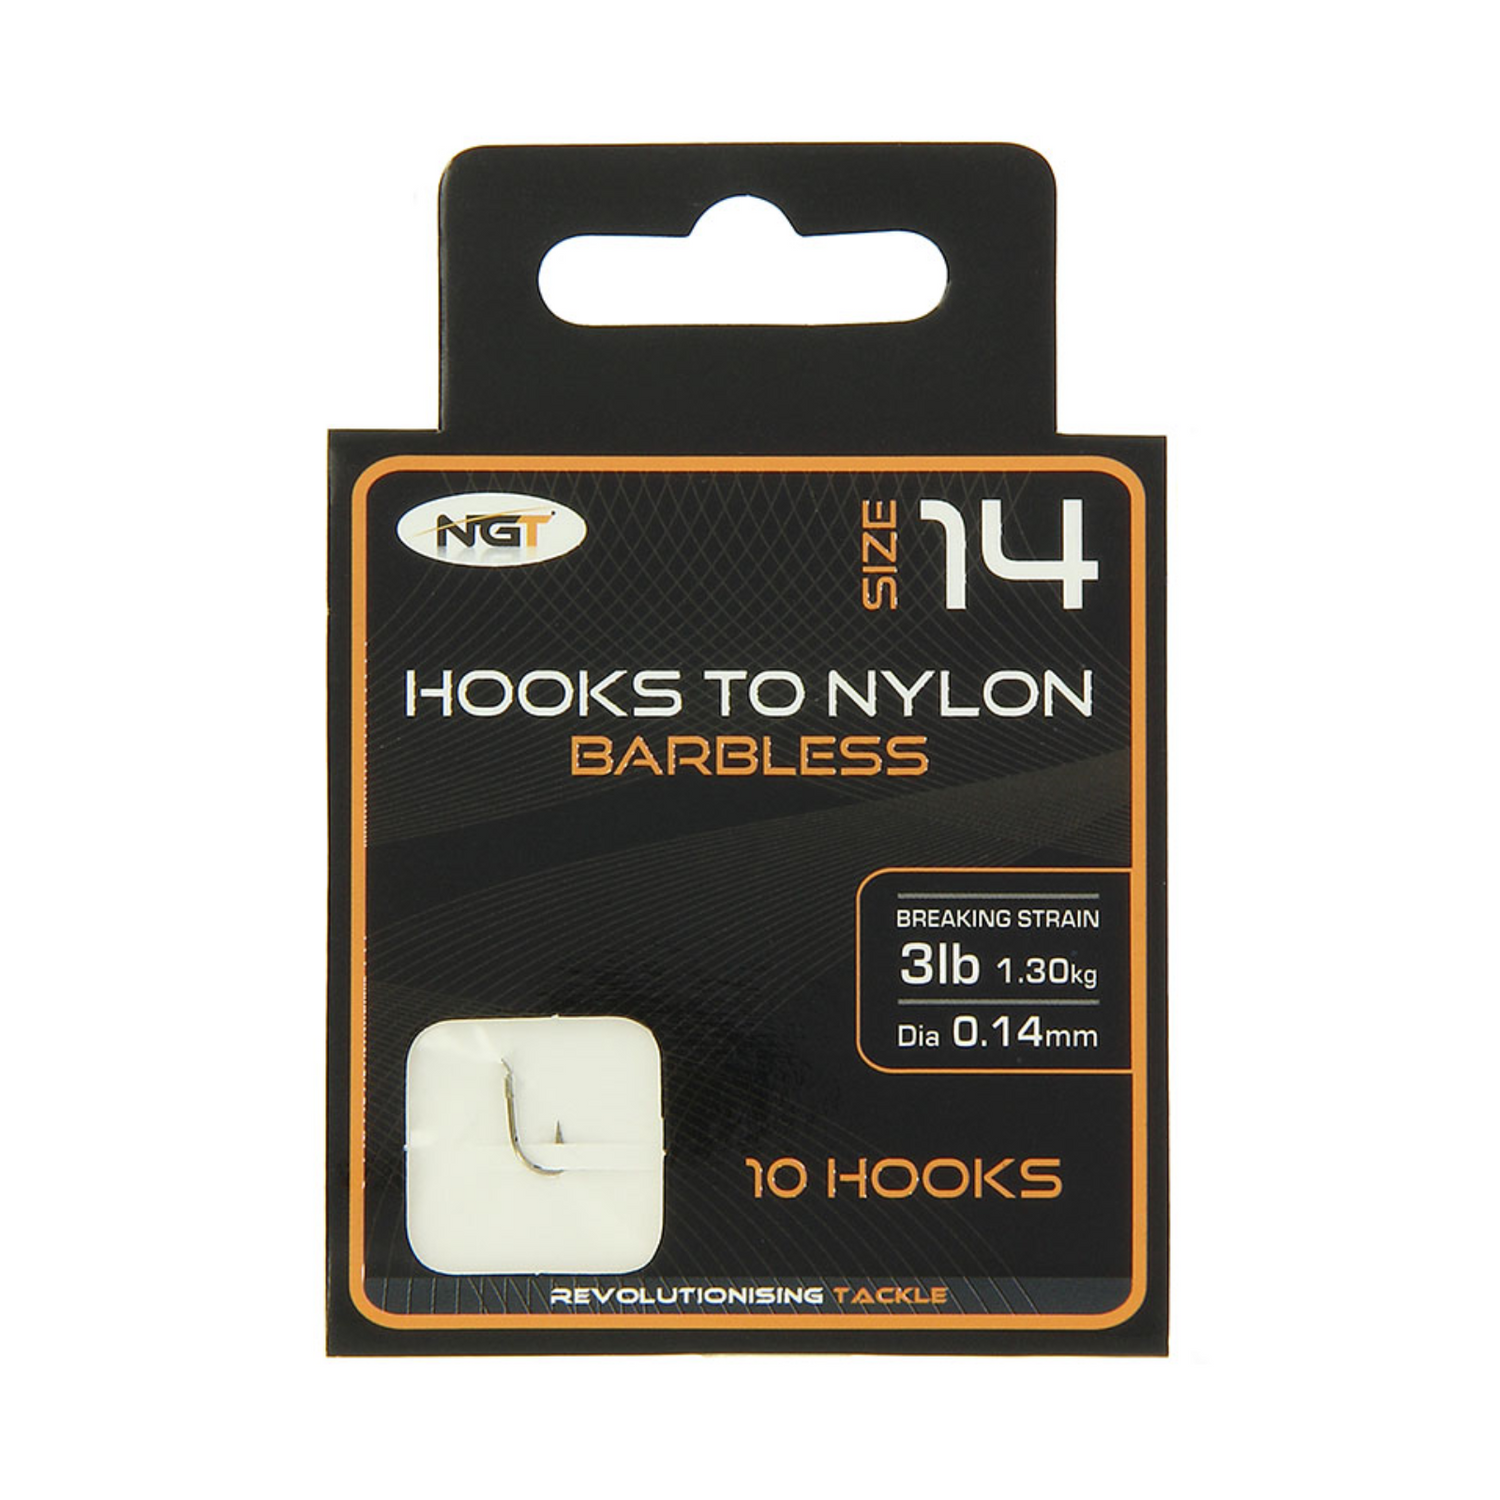 NGT BARBLESS HOOKS TO NYLON. – Fish Online Store UK